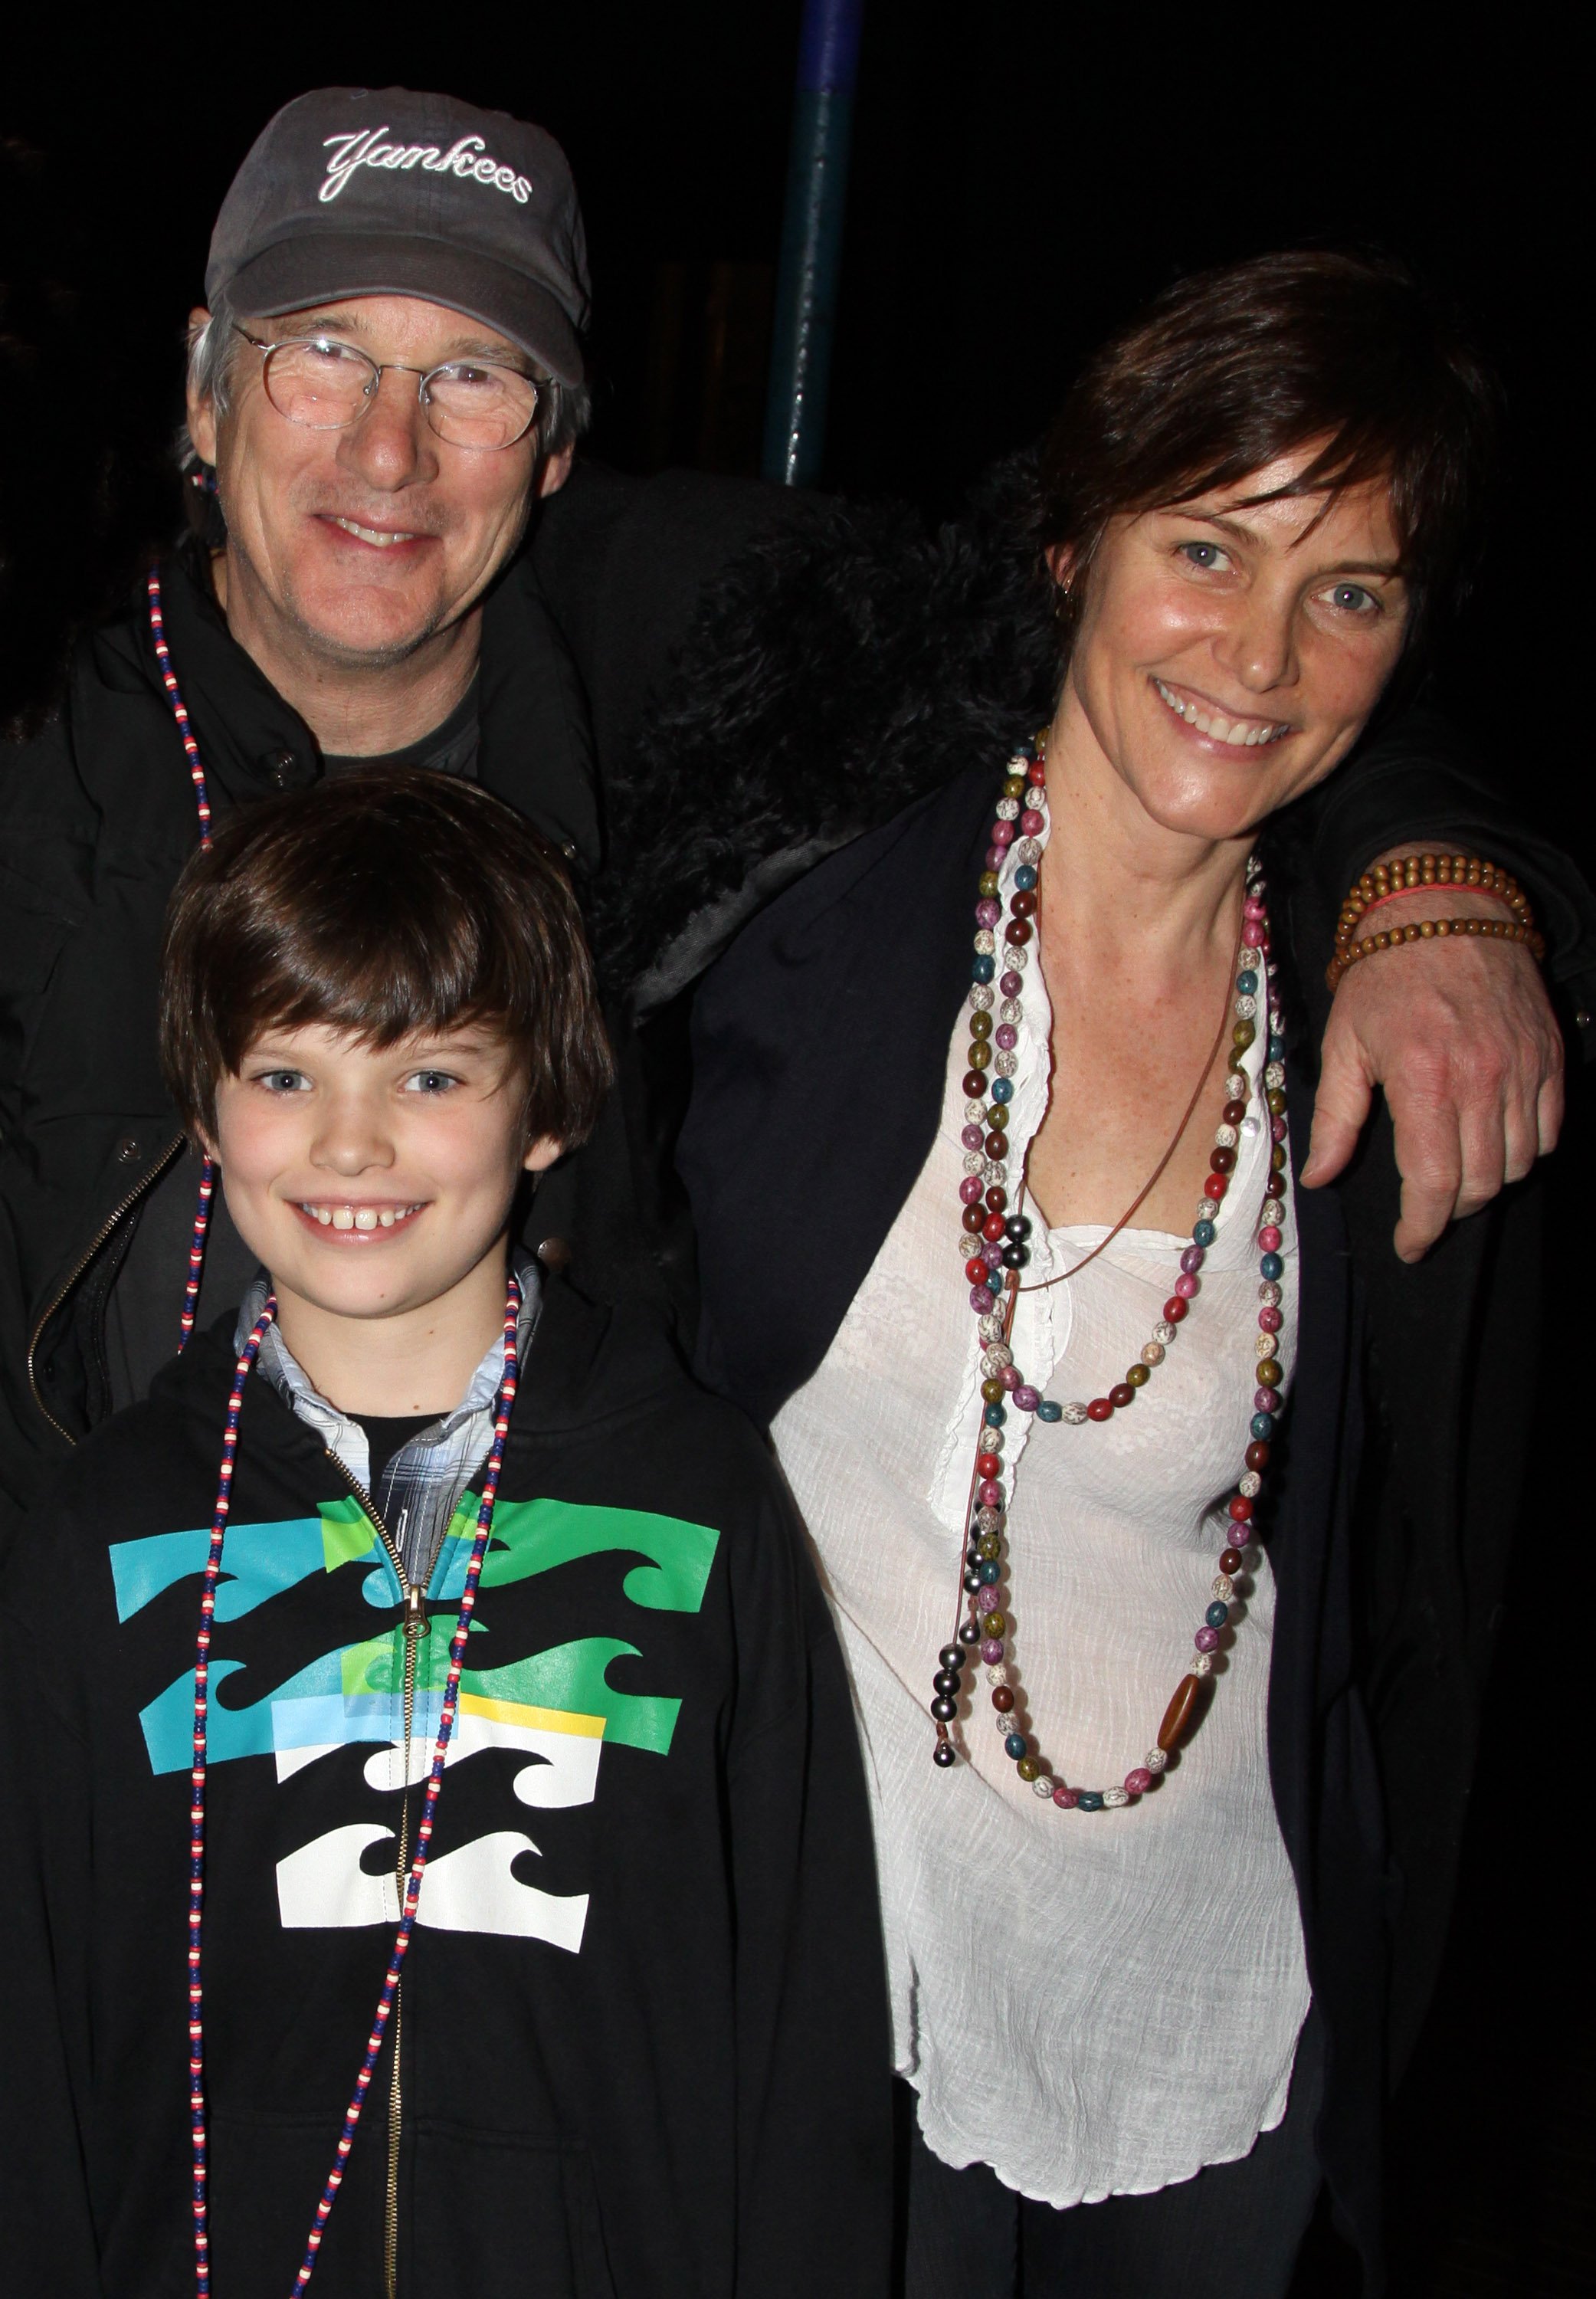 Richard Gere, Cary Lowell and son Homer Gere attend the hit musical "Hair" on Broadway at The Al Hirshfeld Theater on March 14, 2010 in New York City. | Source: Getty Images